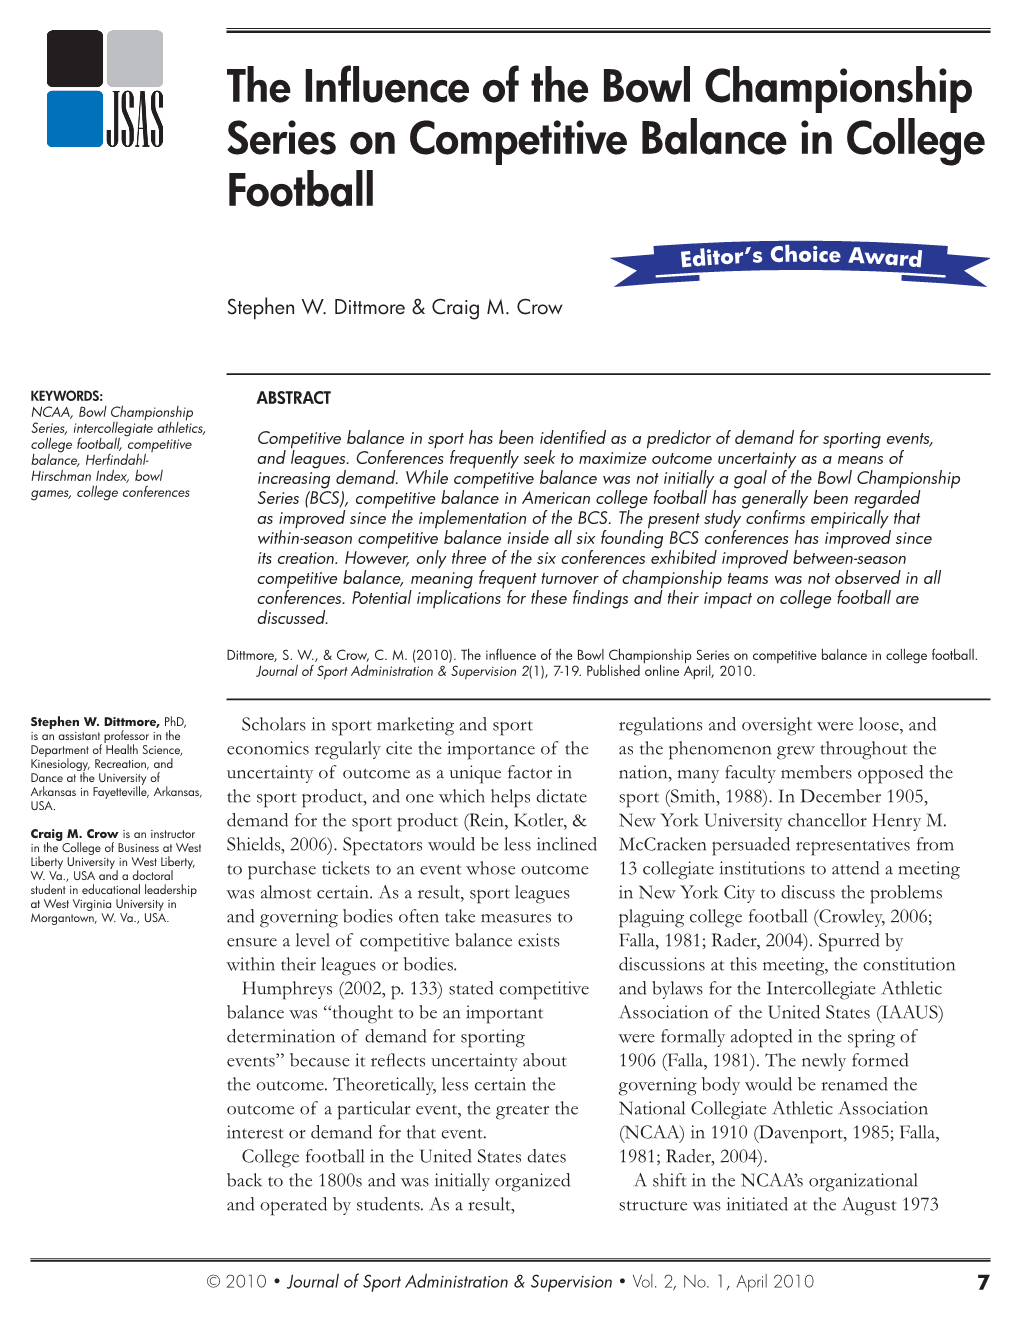 The Influence of the Bowl Championship Series on Competitive Balance in College Football